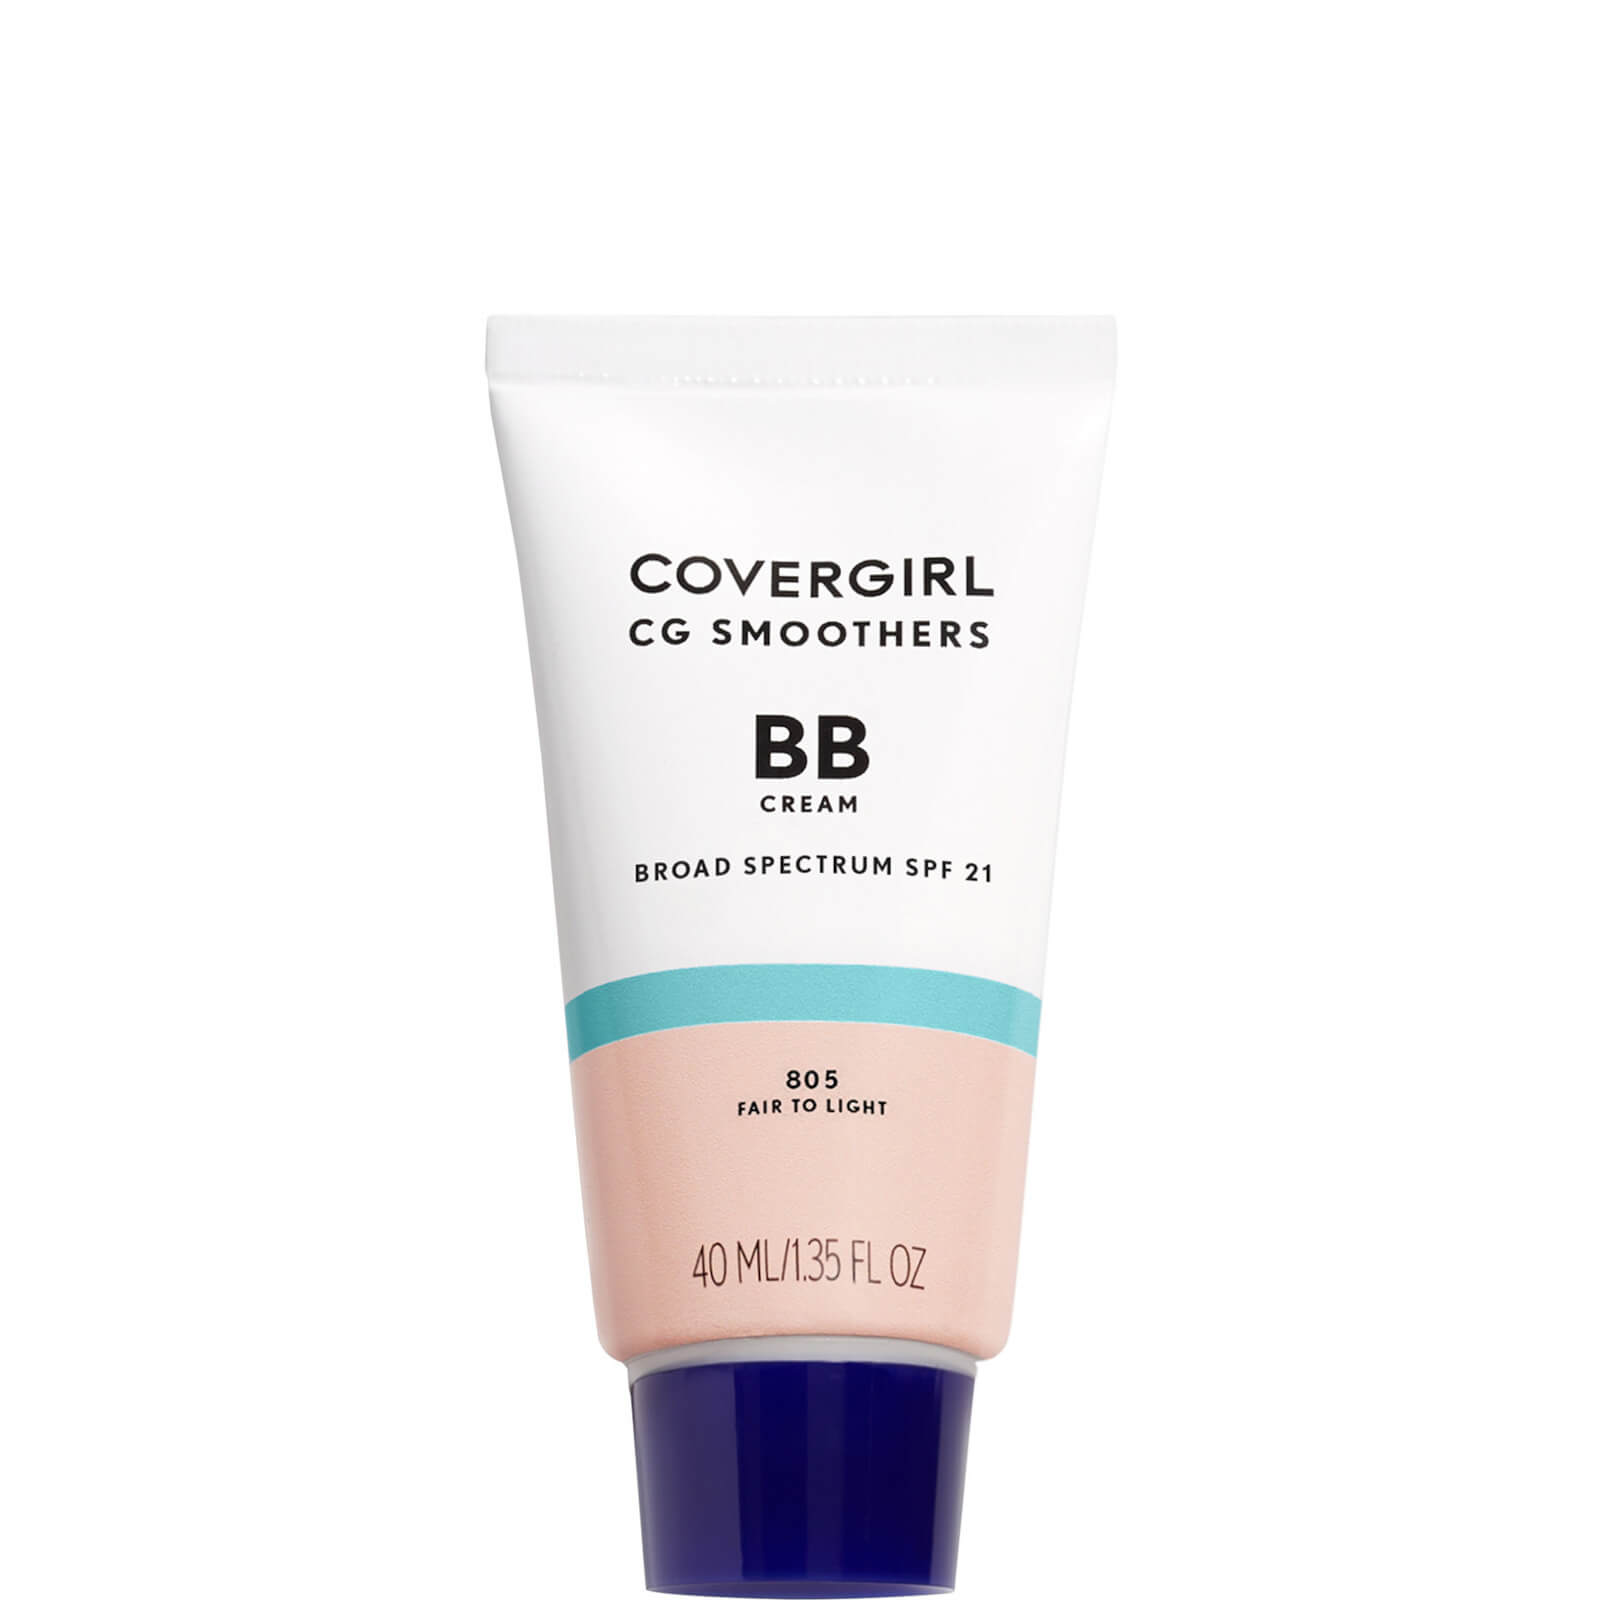 Covergirl Smoothers Lightweight Spf15 Bb Cream 7 oz (various Shades) - Fair To Light